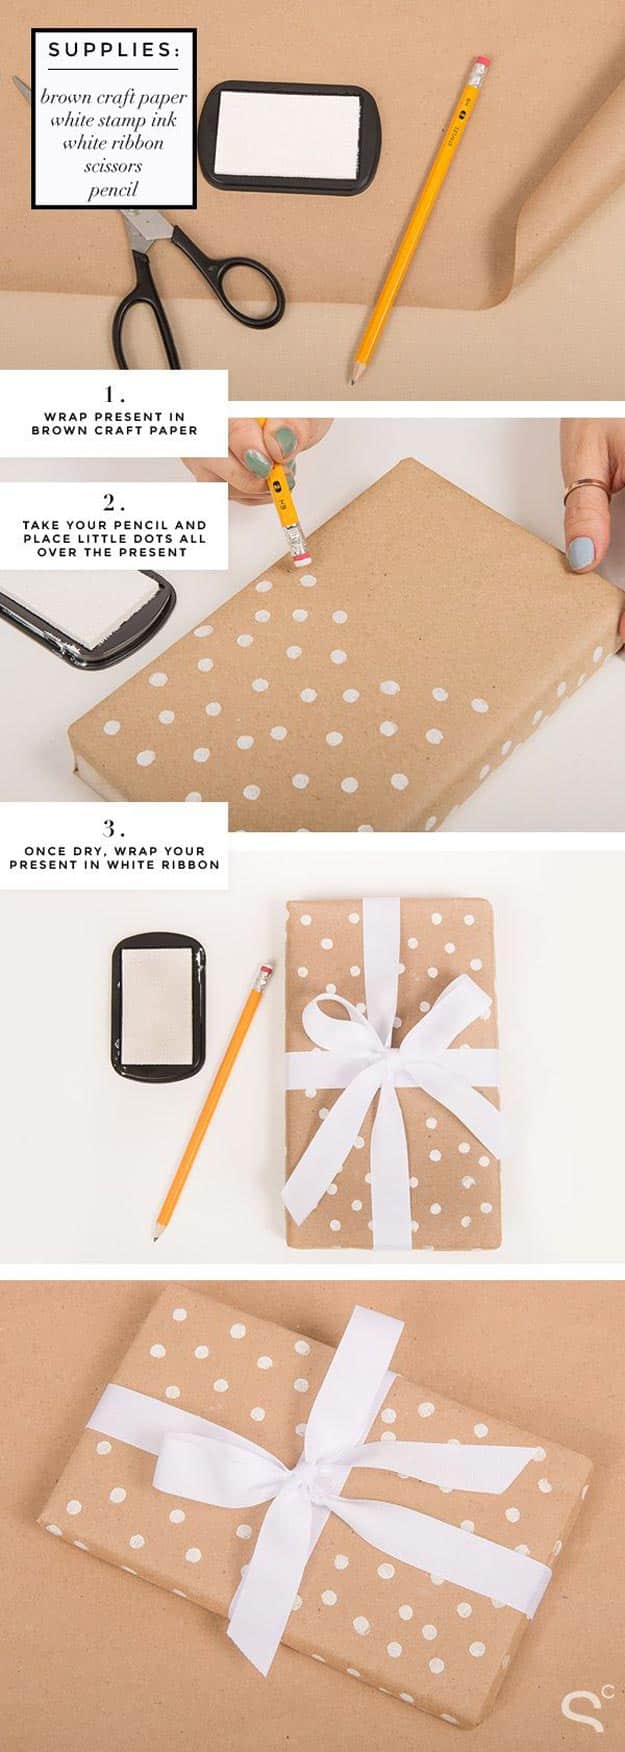 DIY Gift Wrapping Ideas - How To Wrap A Present - Tutorials, Cool Ideas and Instructions | Cute Gift Wrap Ideas for Christmas, Birthdays and Holidays | Tips for Bows and Creative Wrapping Papers | Polka-Dot-Gift-Wrap #gifts #diys